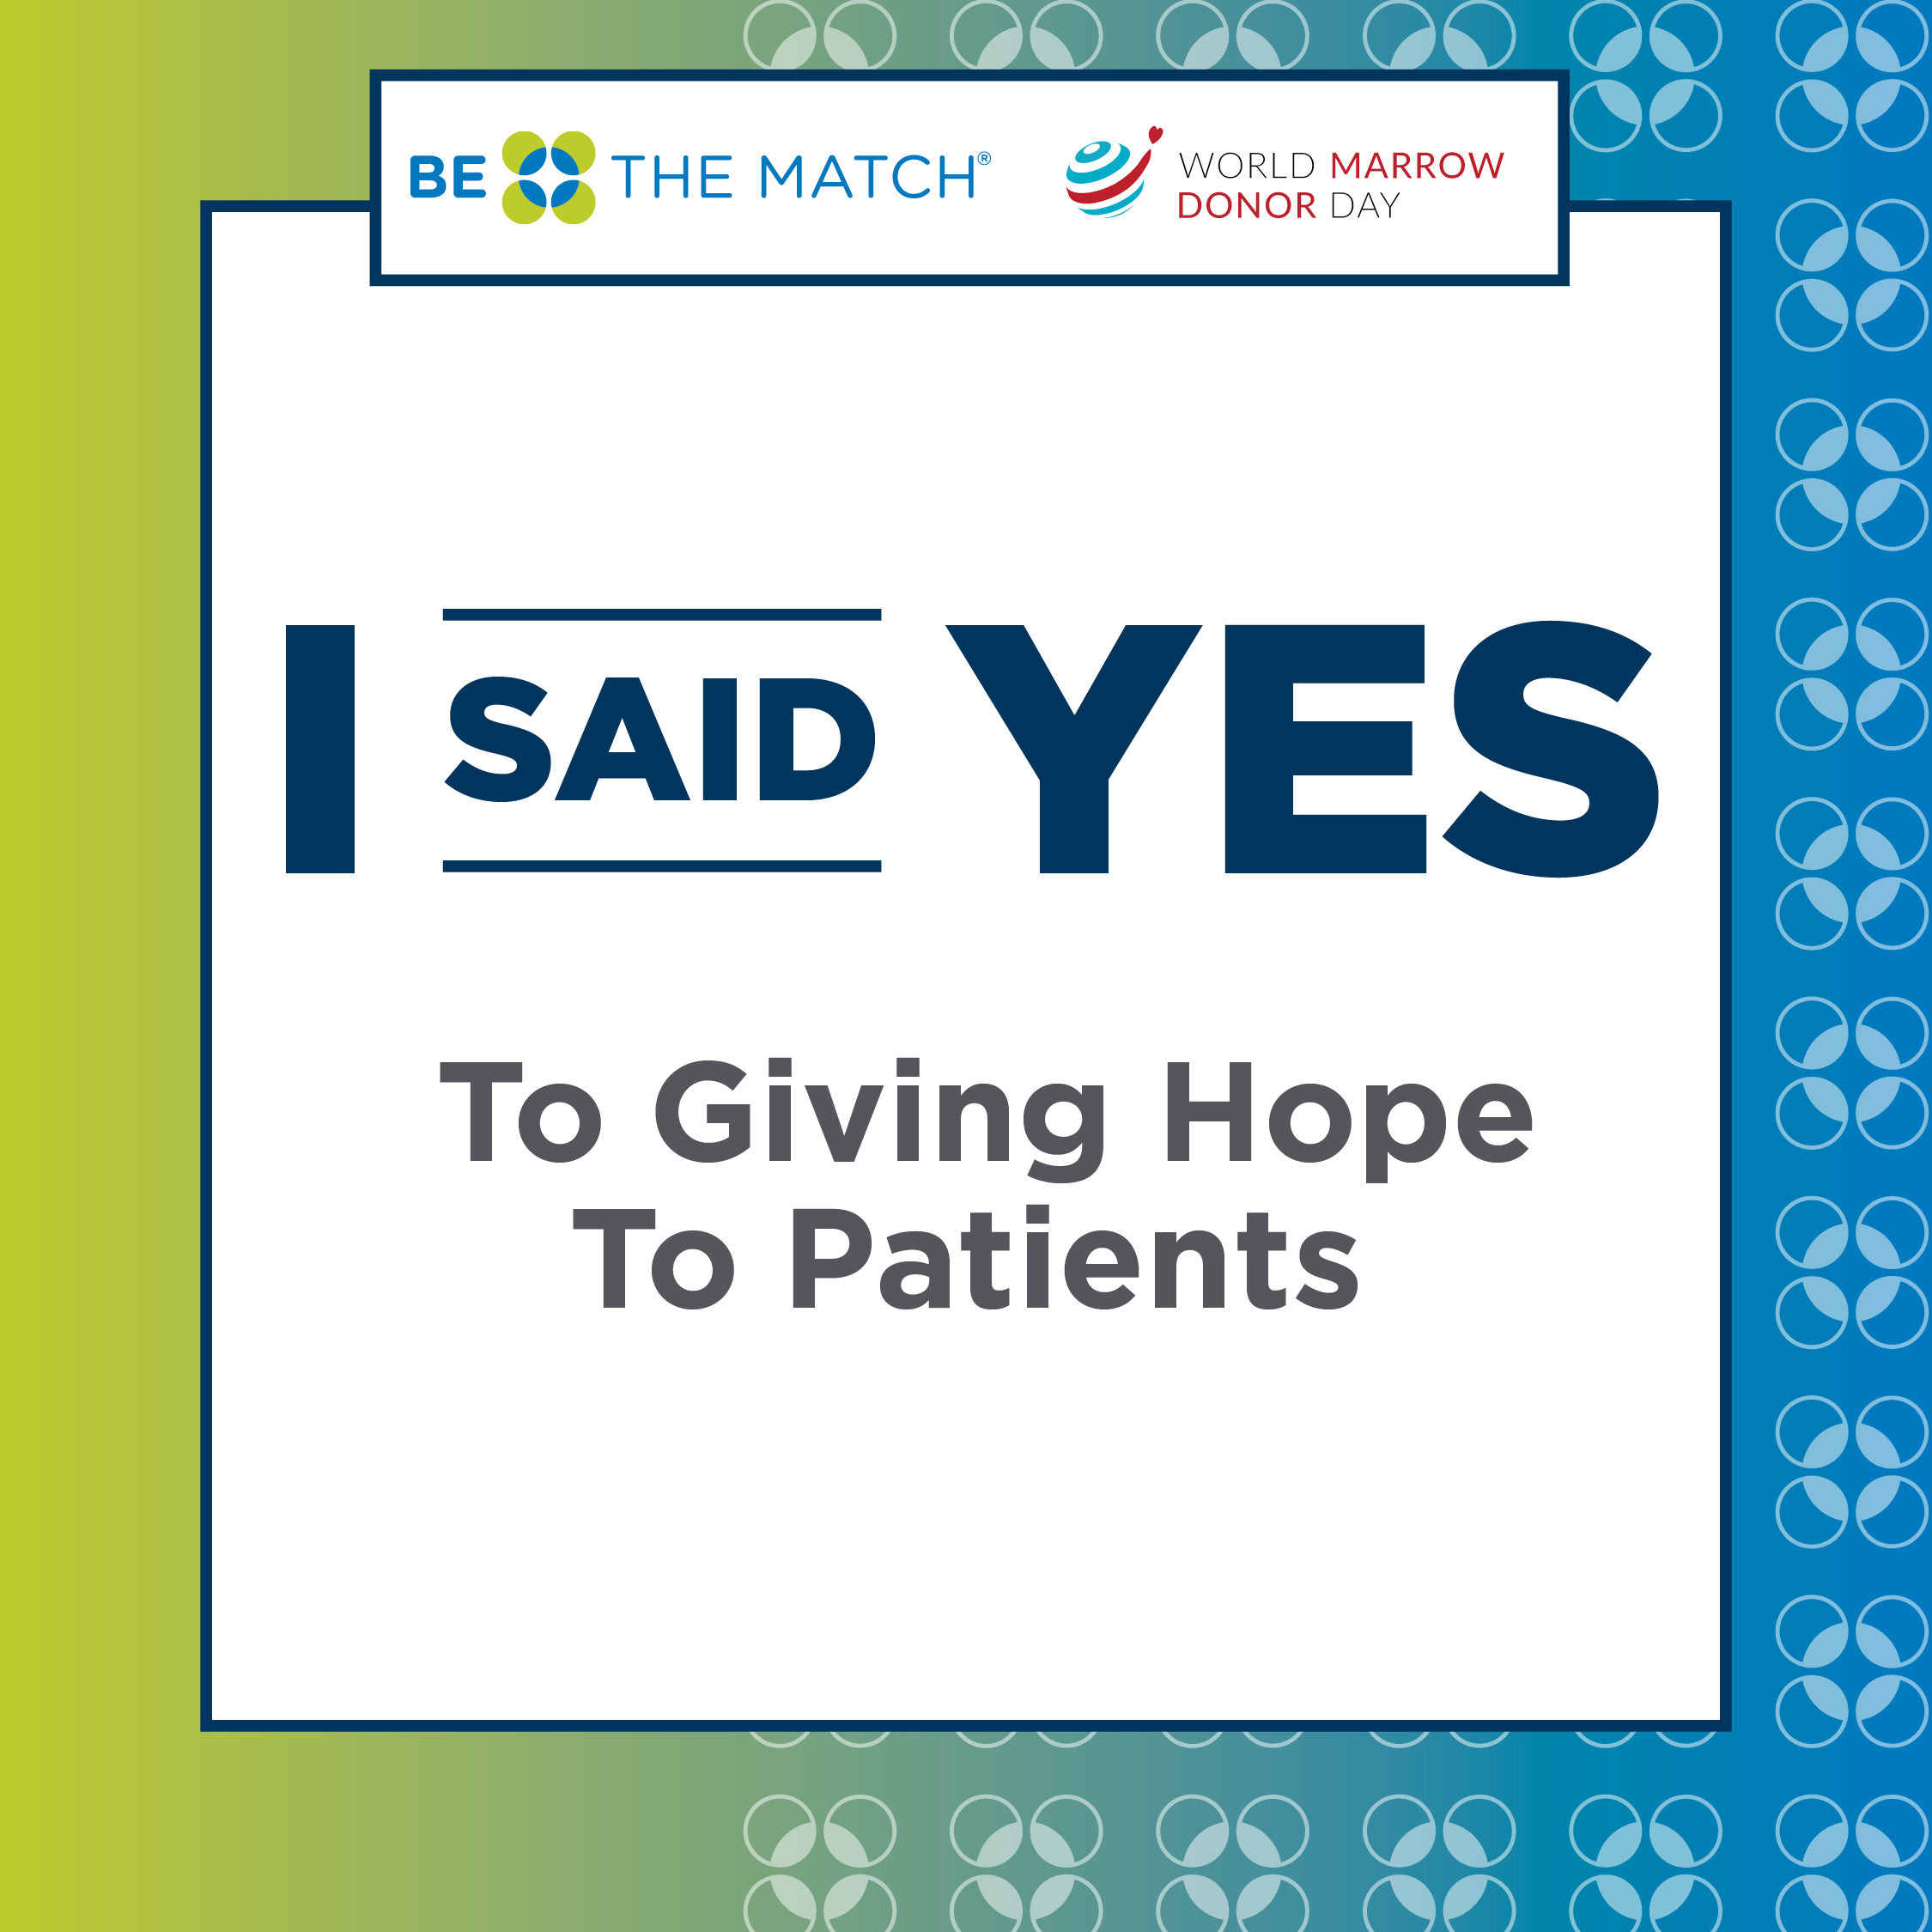 I said yes to giving hope to patients